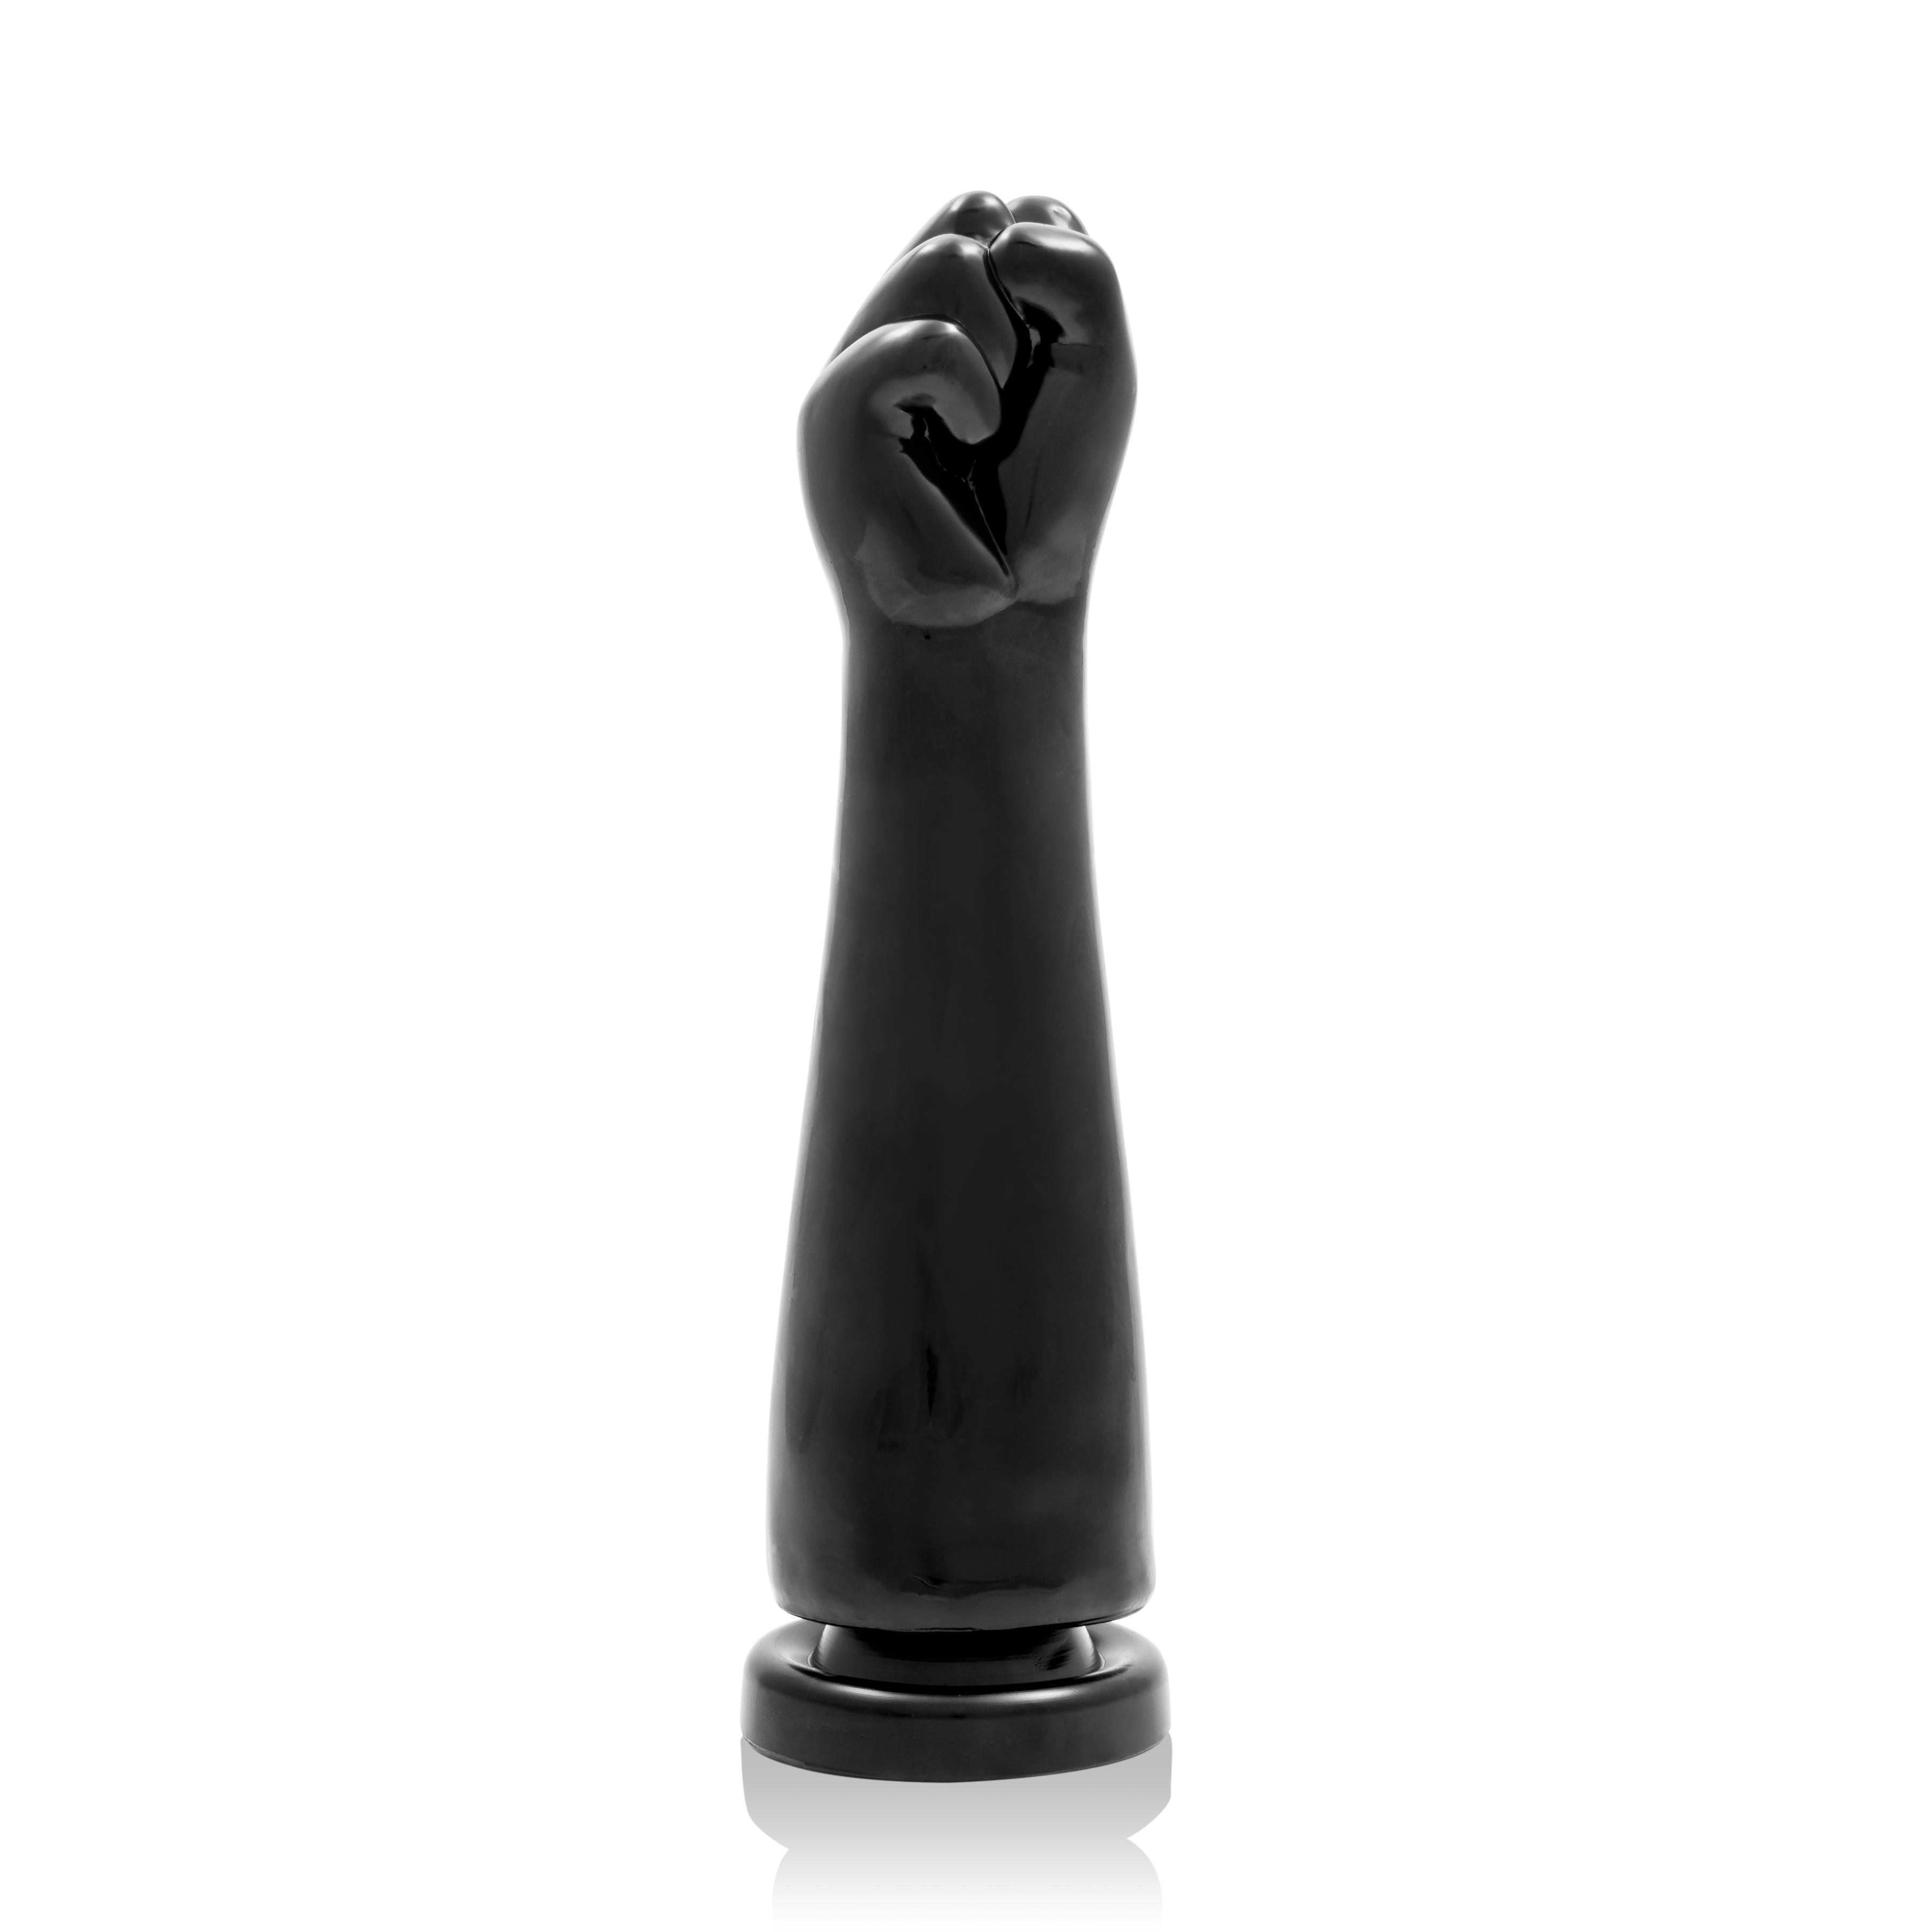 SI IGNITE The Rebel Exxxtreme with suction, 32 cm, Black